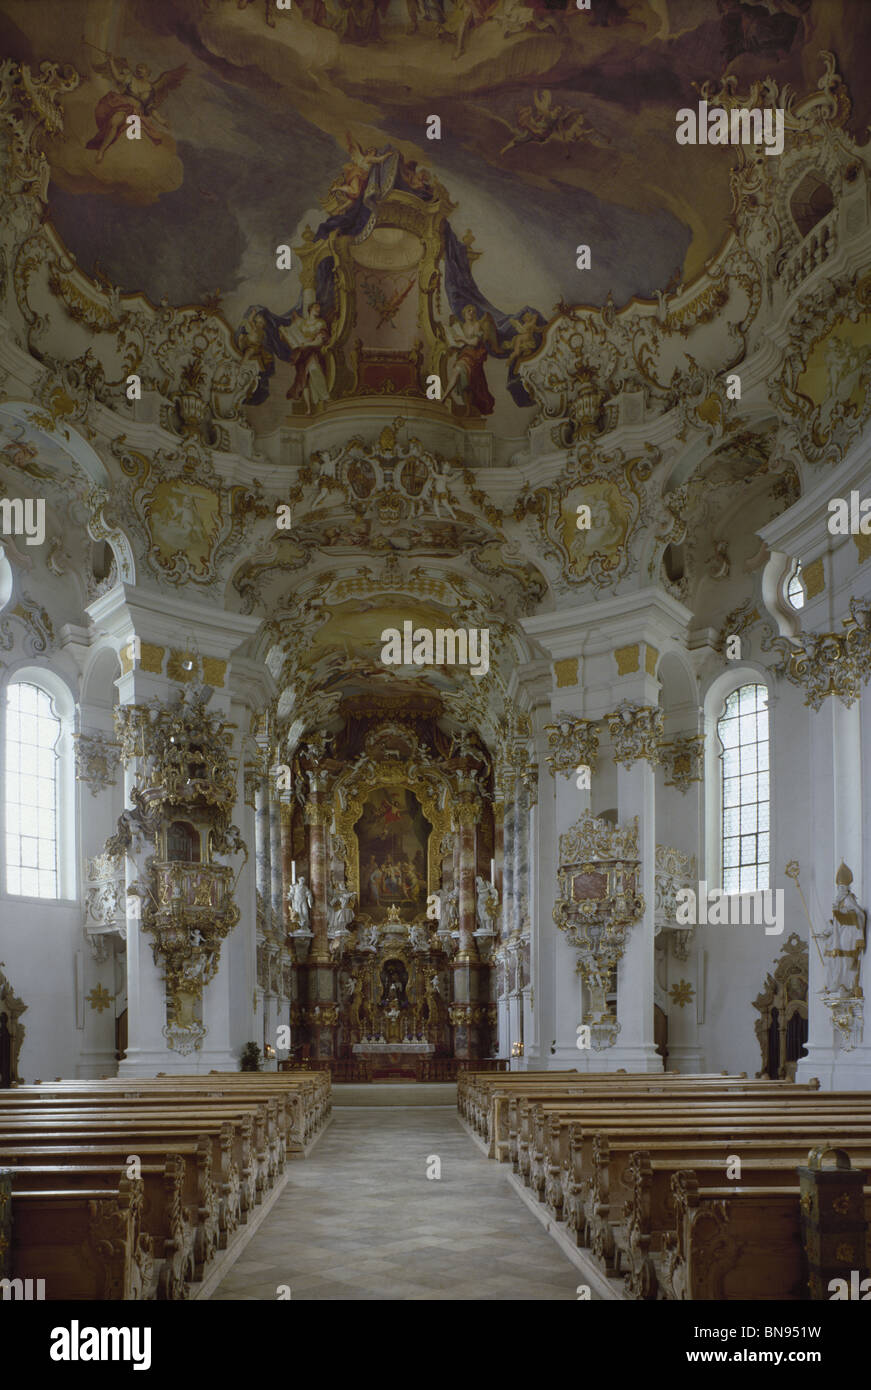 Wieskirche, Pilgrimage Church of Wies, Bavaria. Rococo church with oval nave by Dominikus Zimmermann, 1744-54. Stock Photo